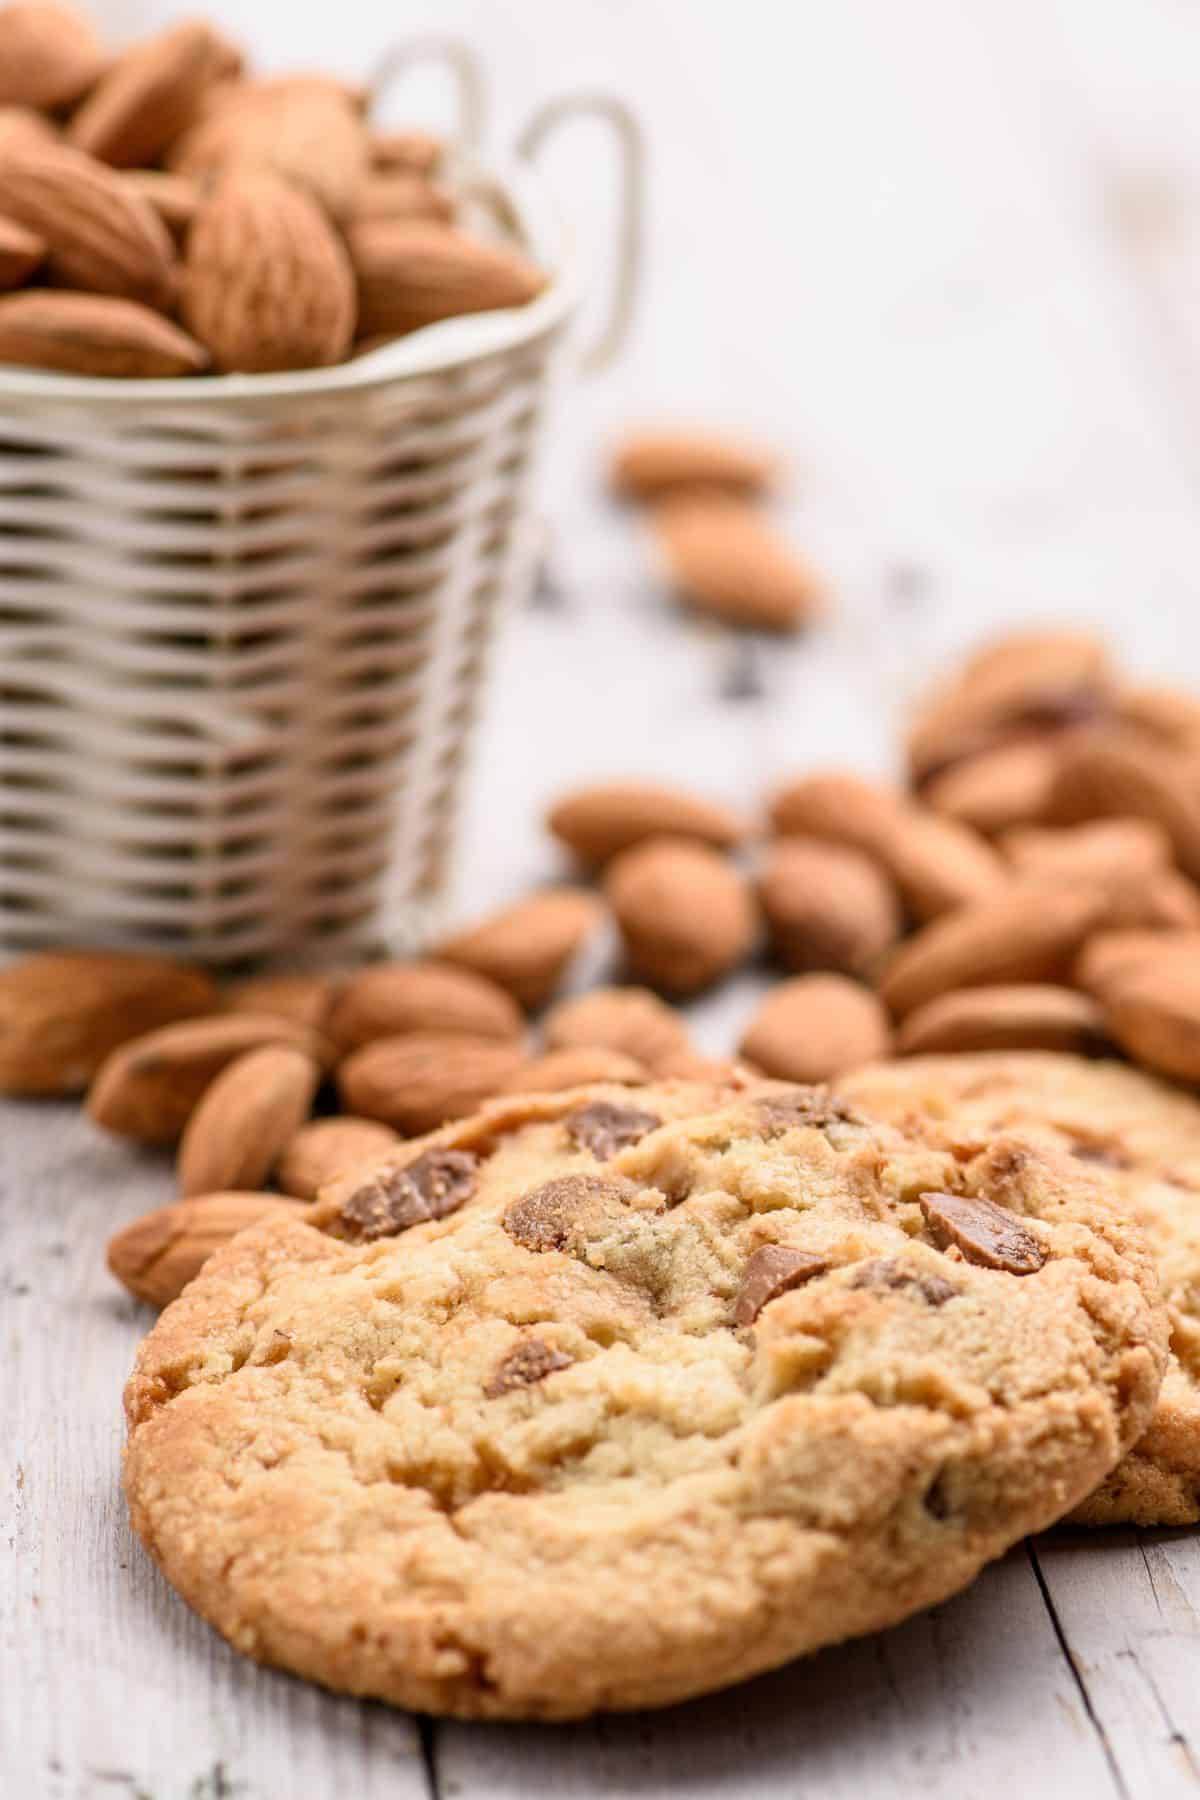 Almond flour chocolate chip cookies with almonds in background.